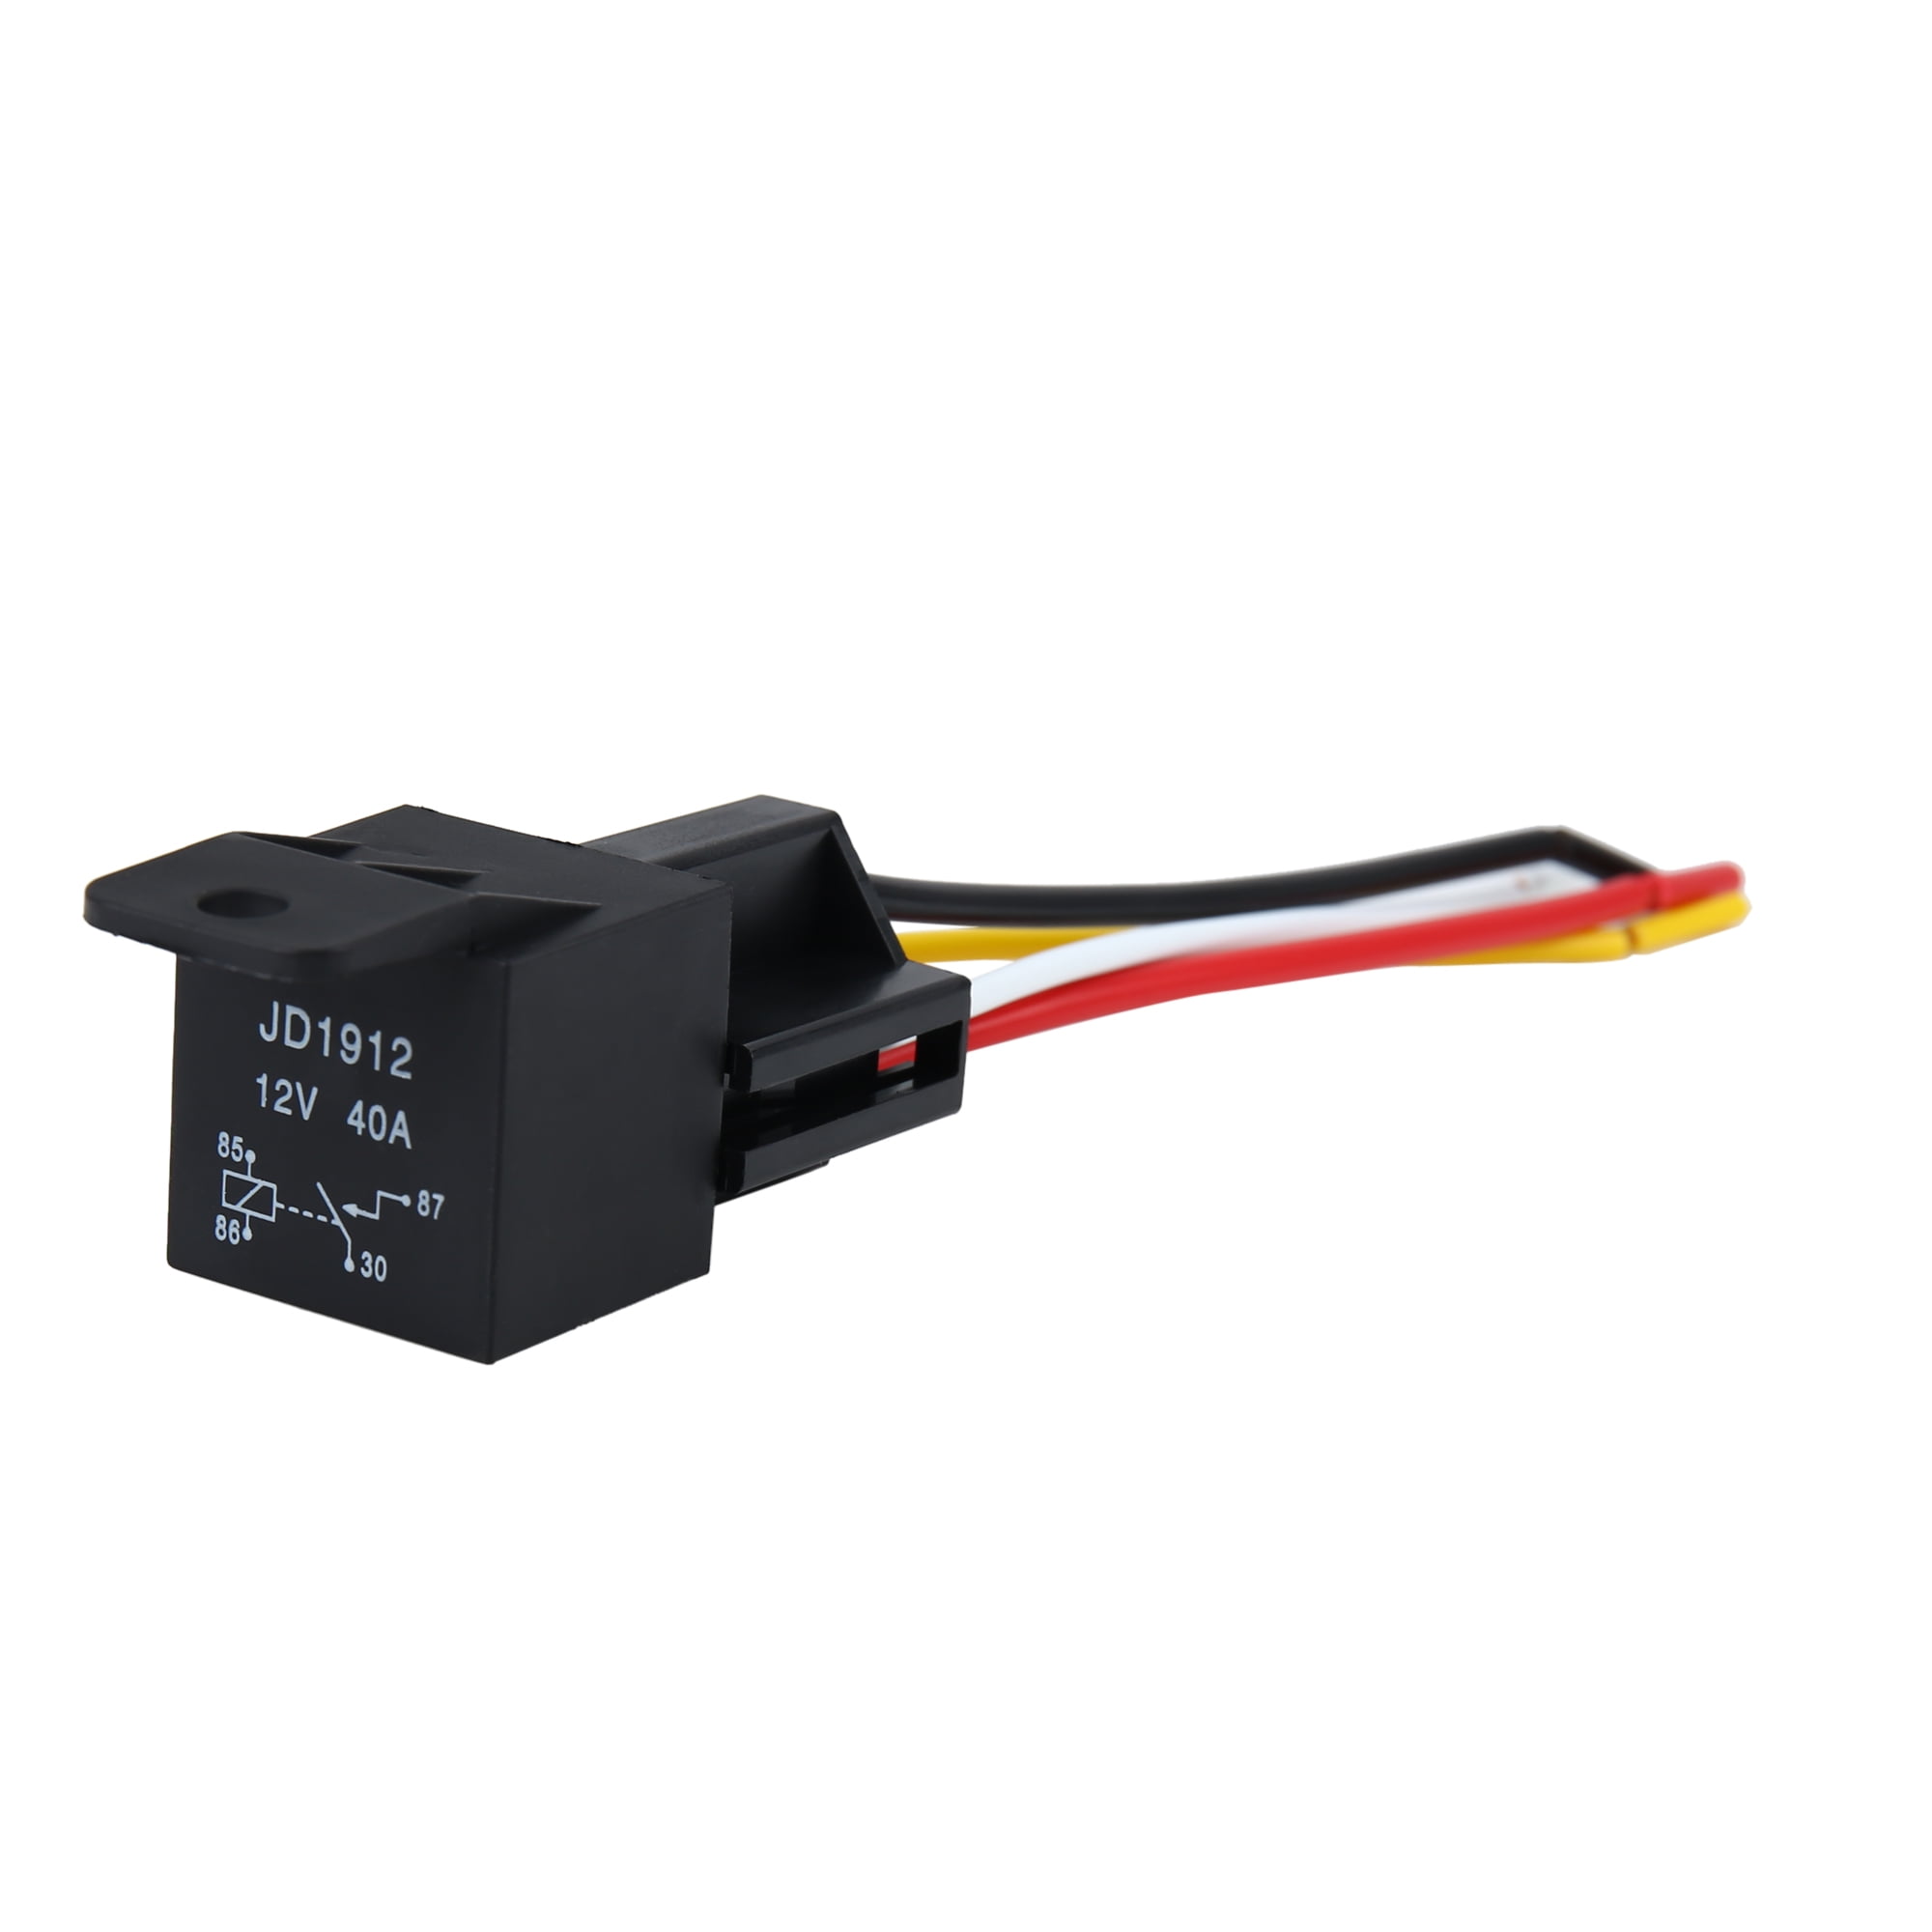 2 PCS DC 12V 80A Car Relay 4Pin Normally Open SPST with Relay Socket Plug 4 Wire